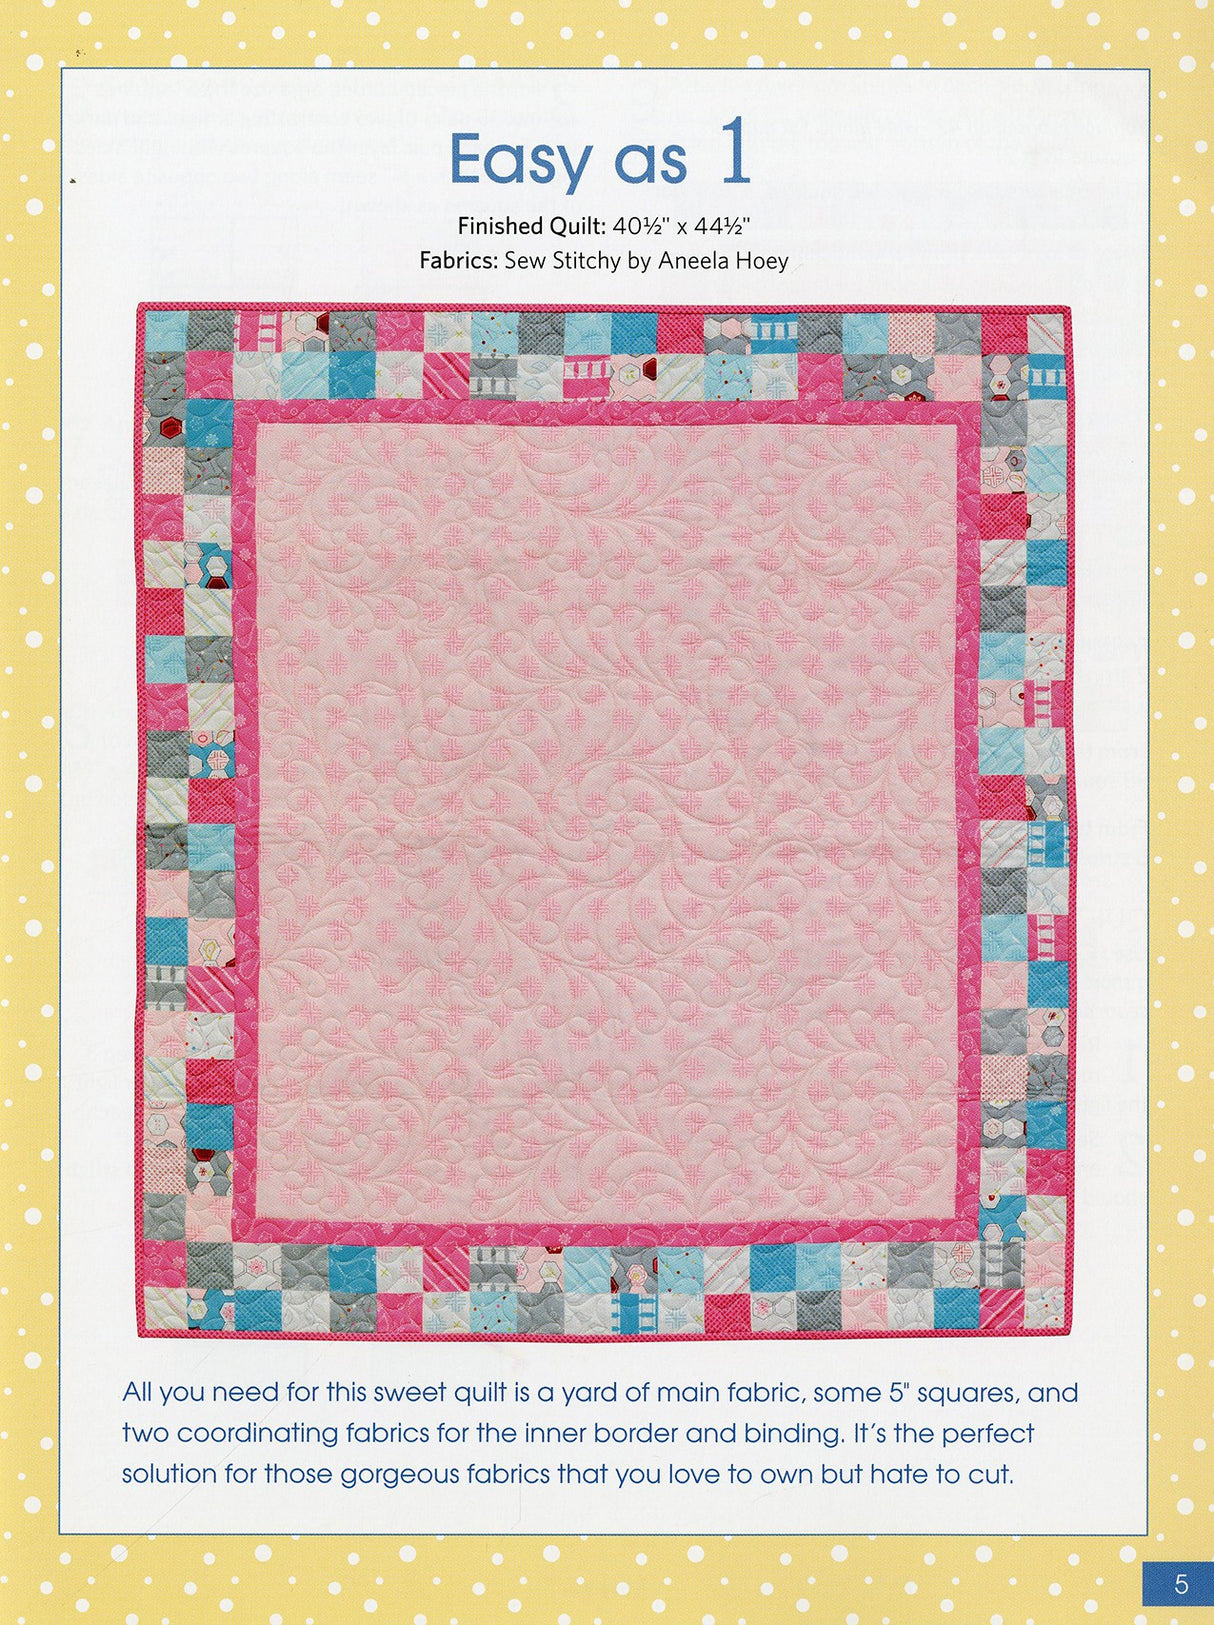 Simple Quilts From Me & My Sister Designs